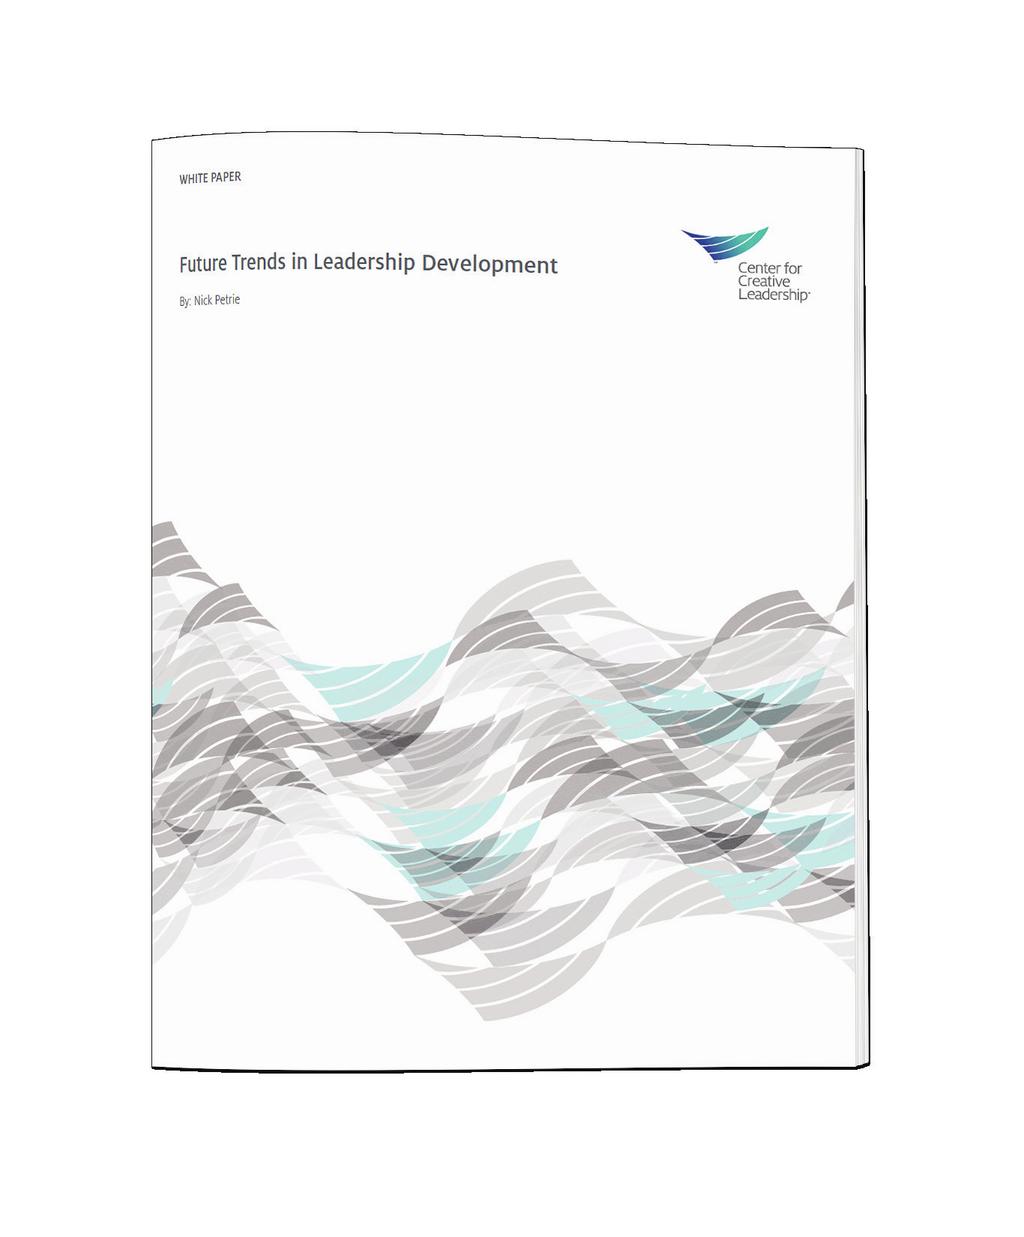 White Papers Our collection of white papers covers a wide range of leadership development topics including: Future Trends in Leadership Development Leadership and the Triple Bottom Line Boundary